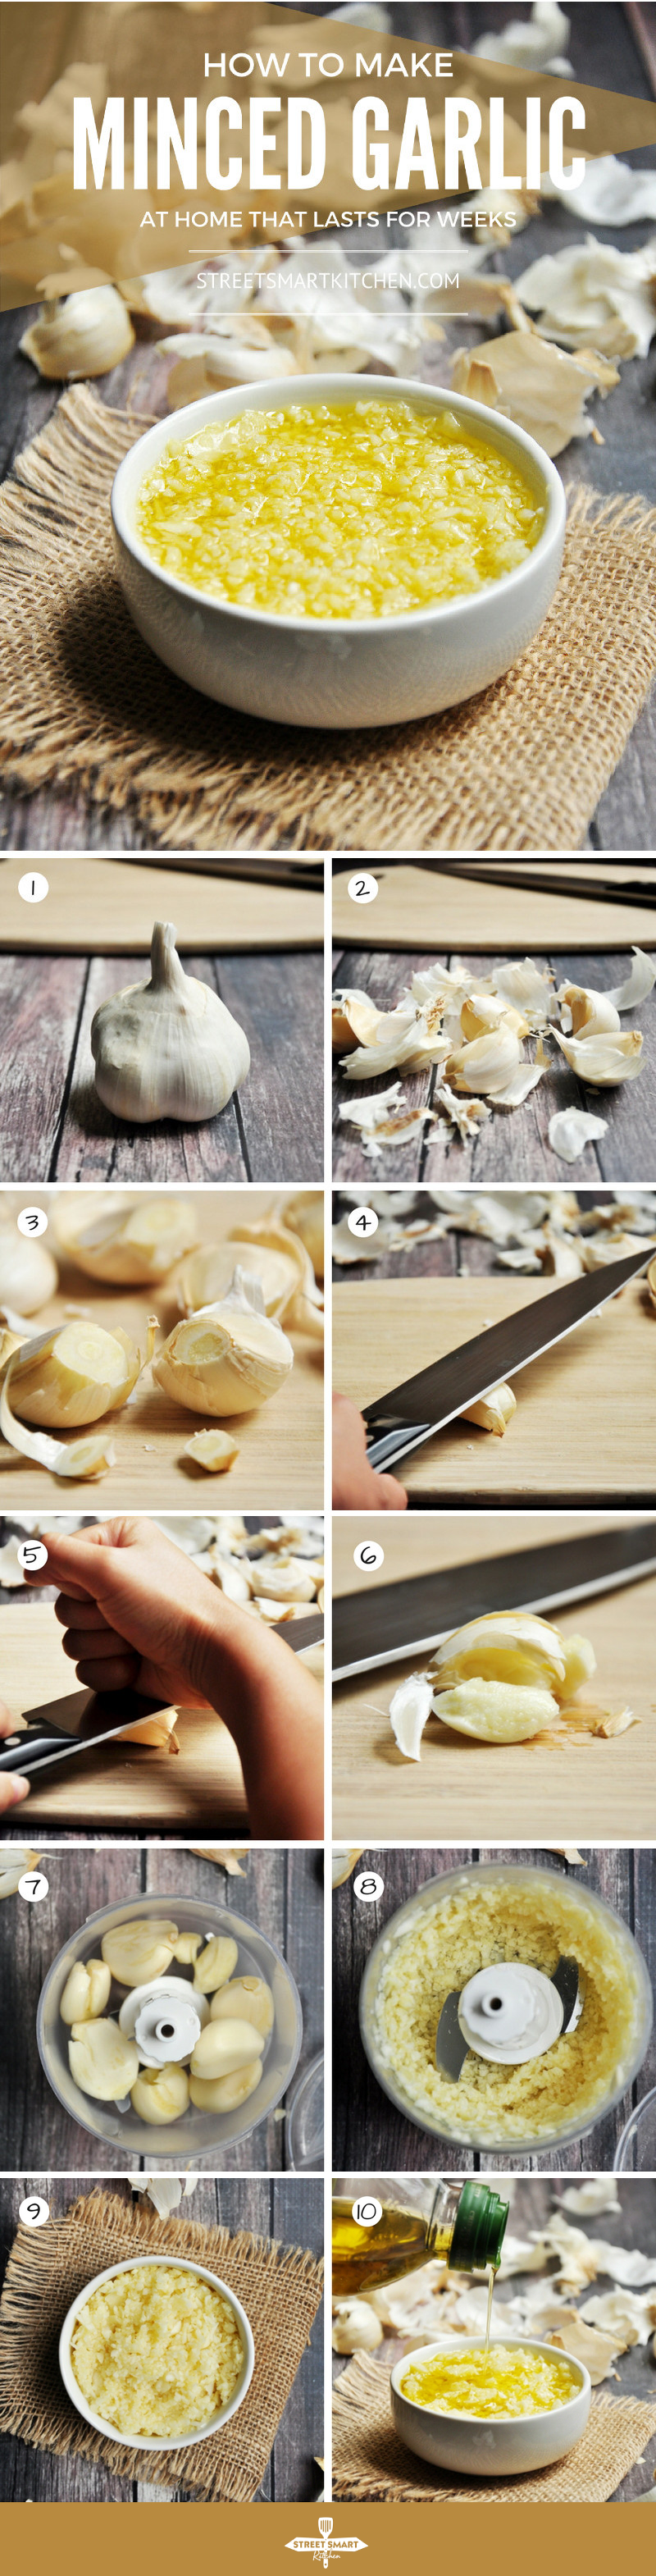 A step-by-step photo and video guide to show you how to make minced garlic at home that can last for weeks. It's a trick often used in restaurants. 